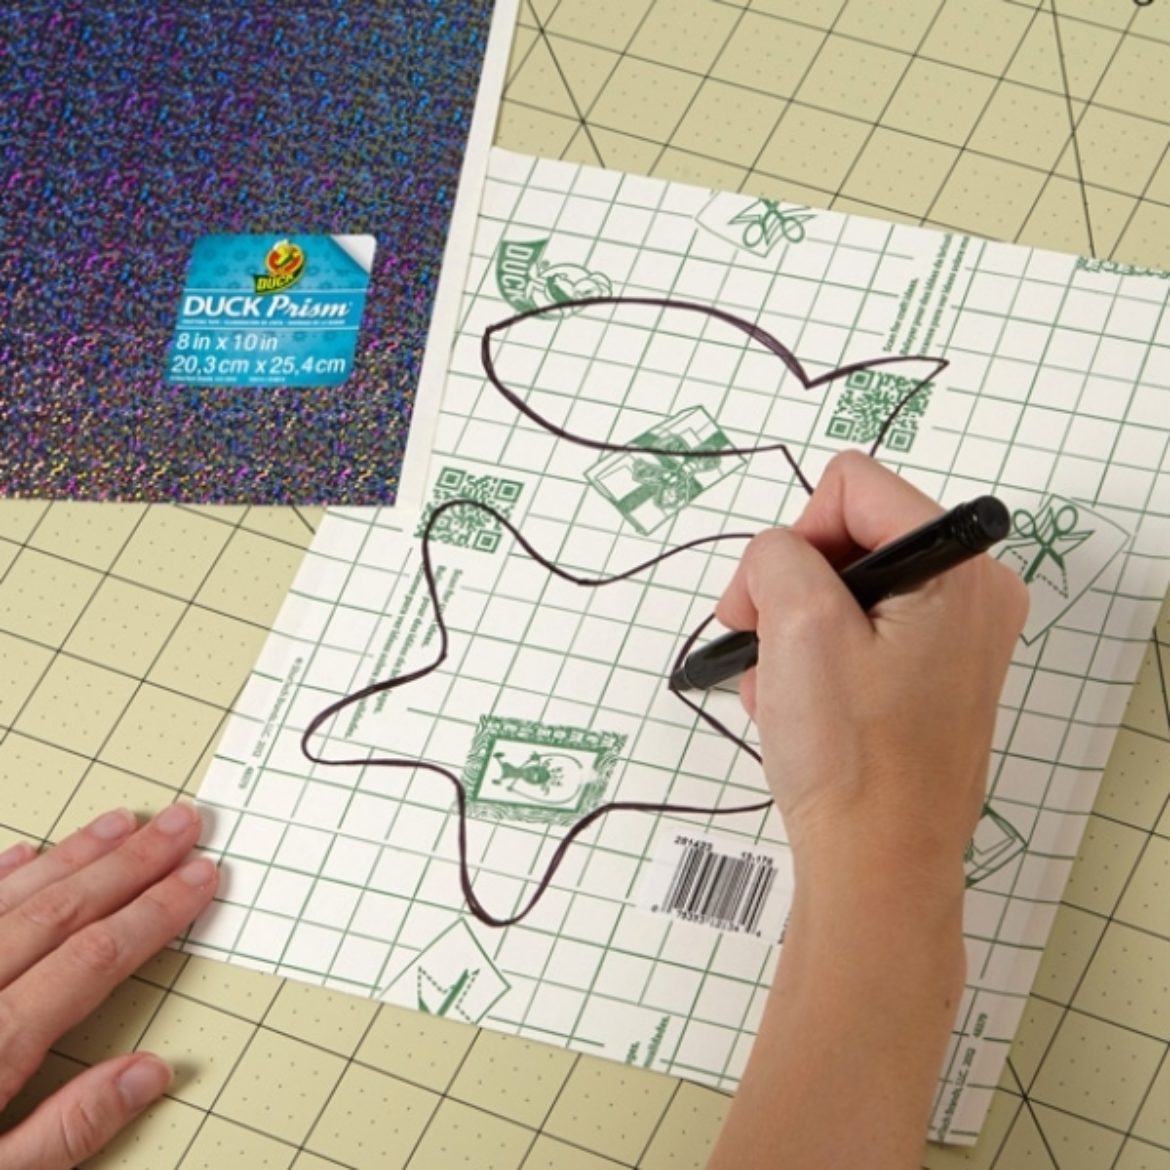 Fish shapes being drawn on the backing of Duck Prism sheets